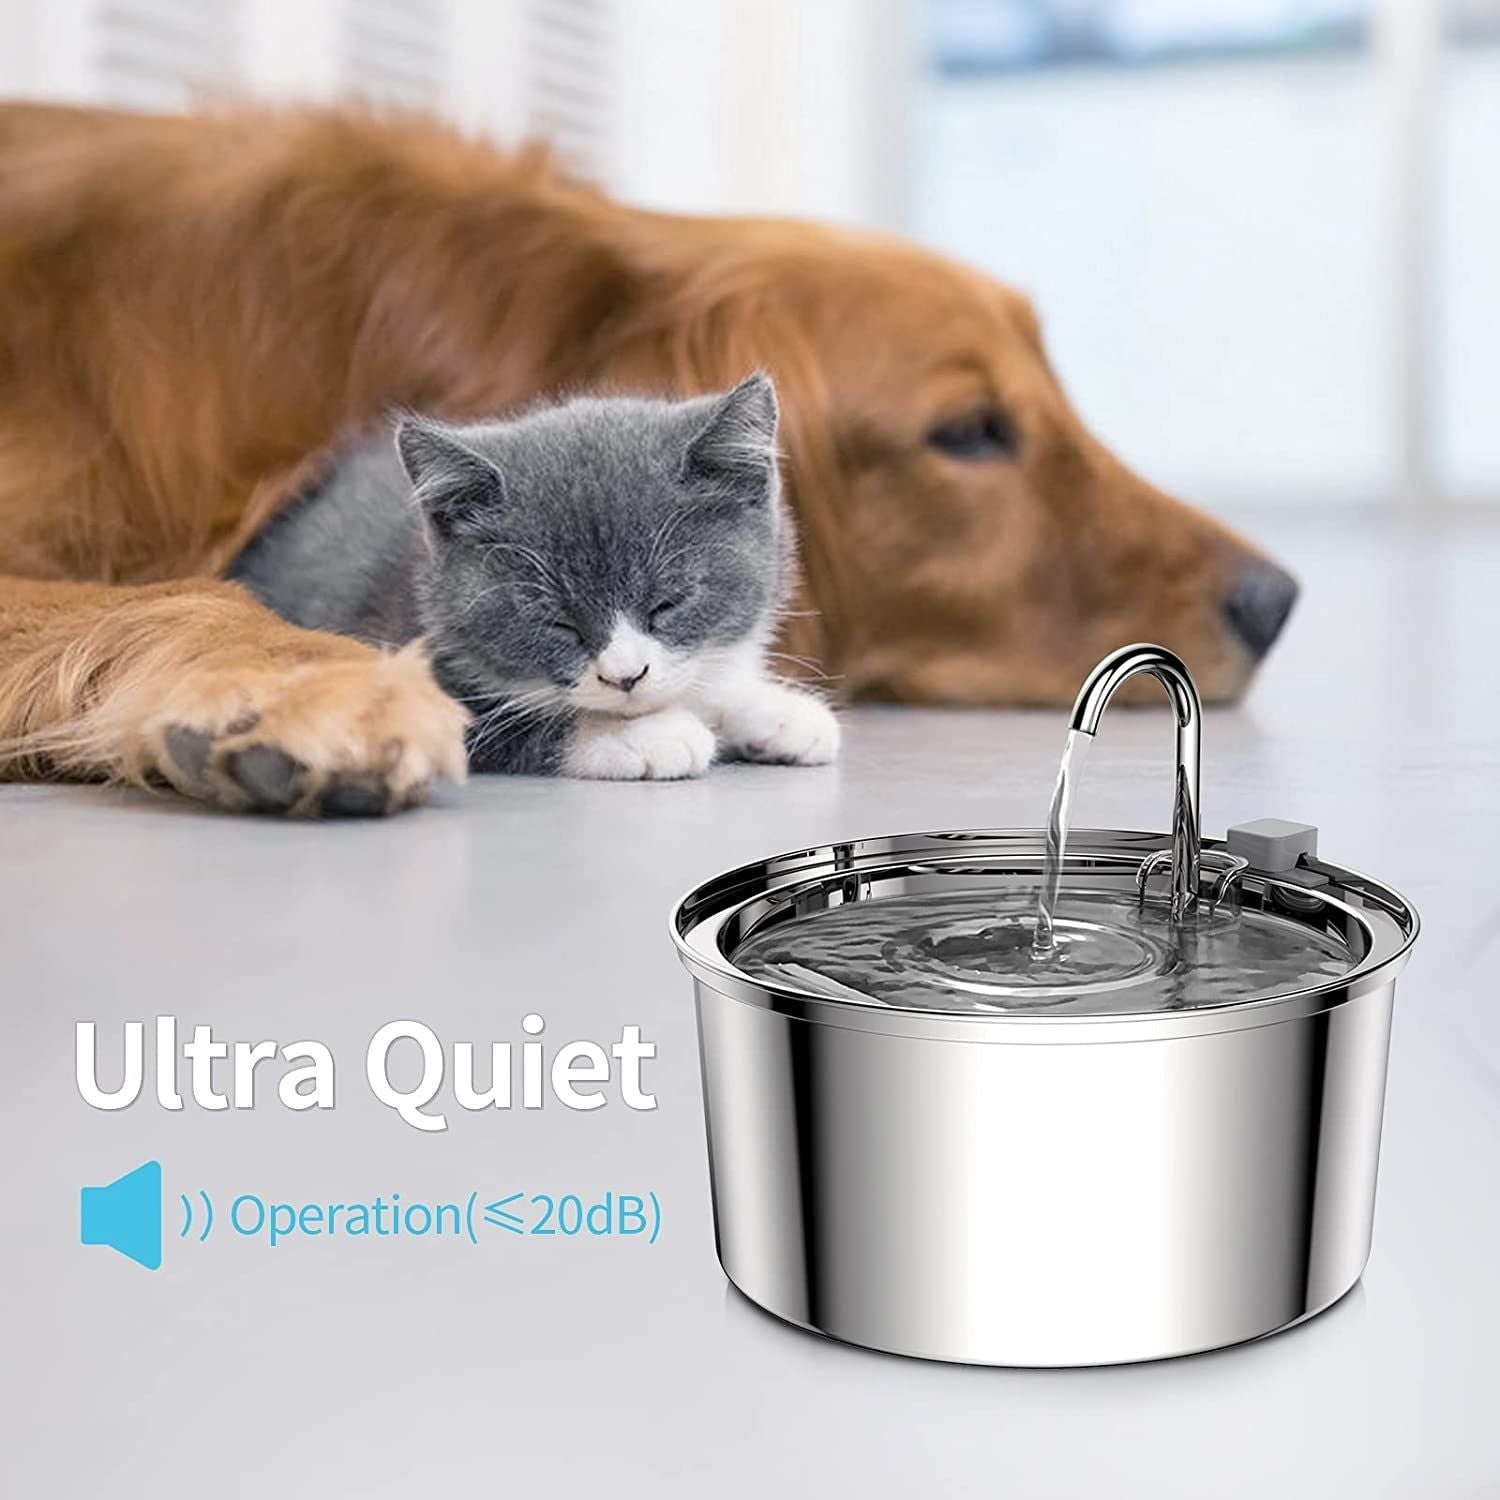 Automatic Stainless Steel Pet Fountain Water Dispenser Cat Water Fountain, 3.2L/108Oz